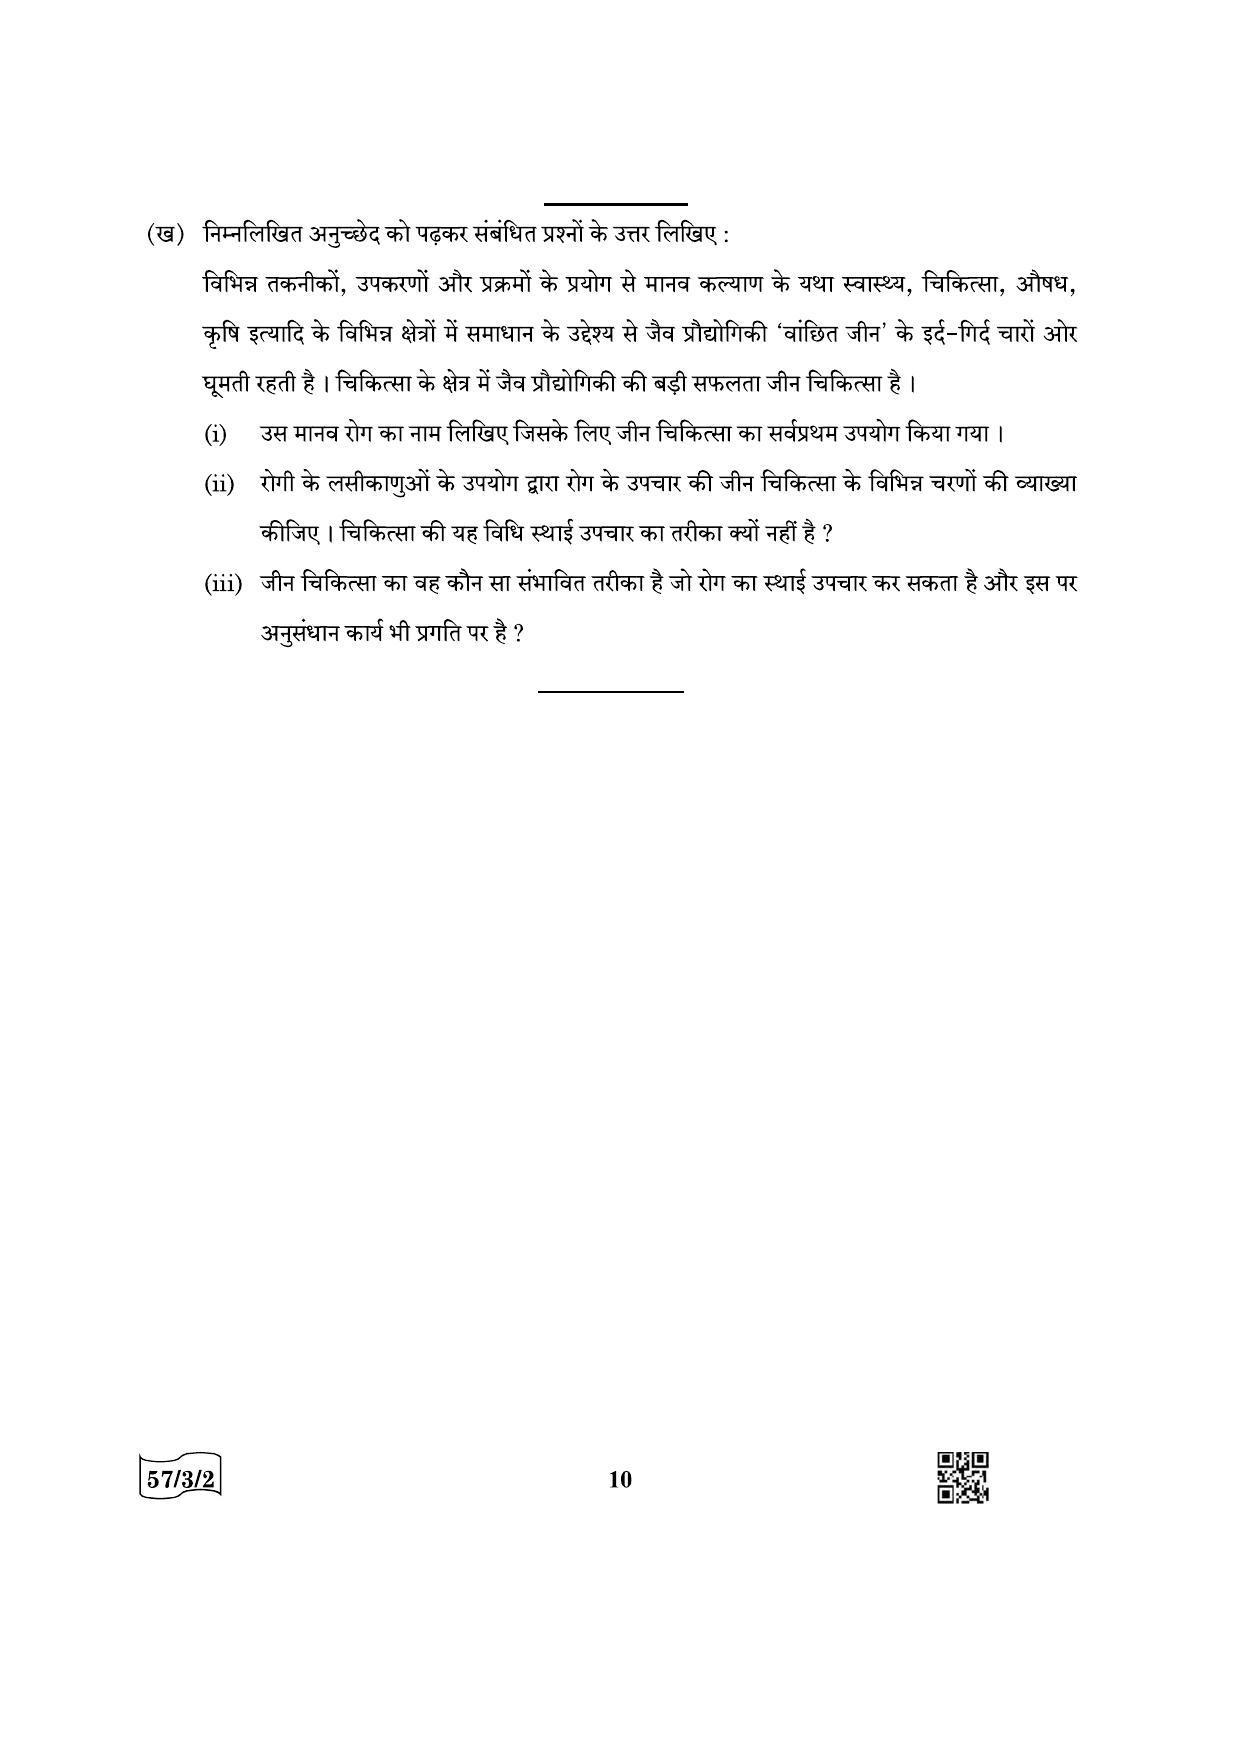 CBSE Class 12 57-3-2 Biology 2022 Question Paper - Page 10